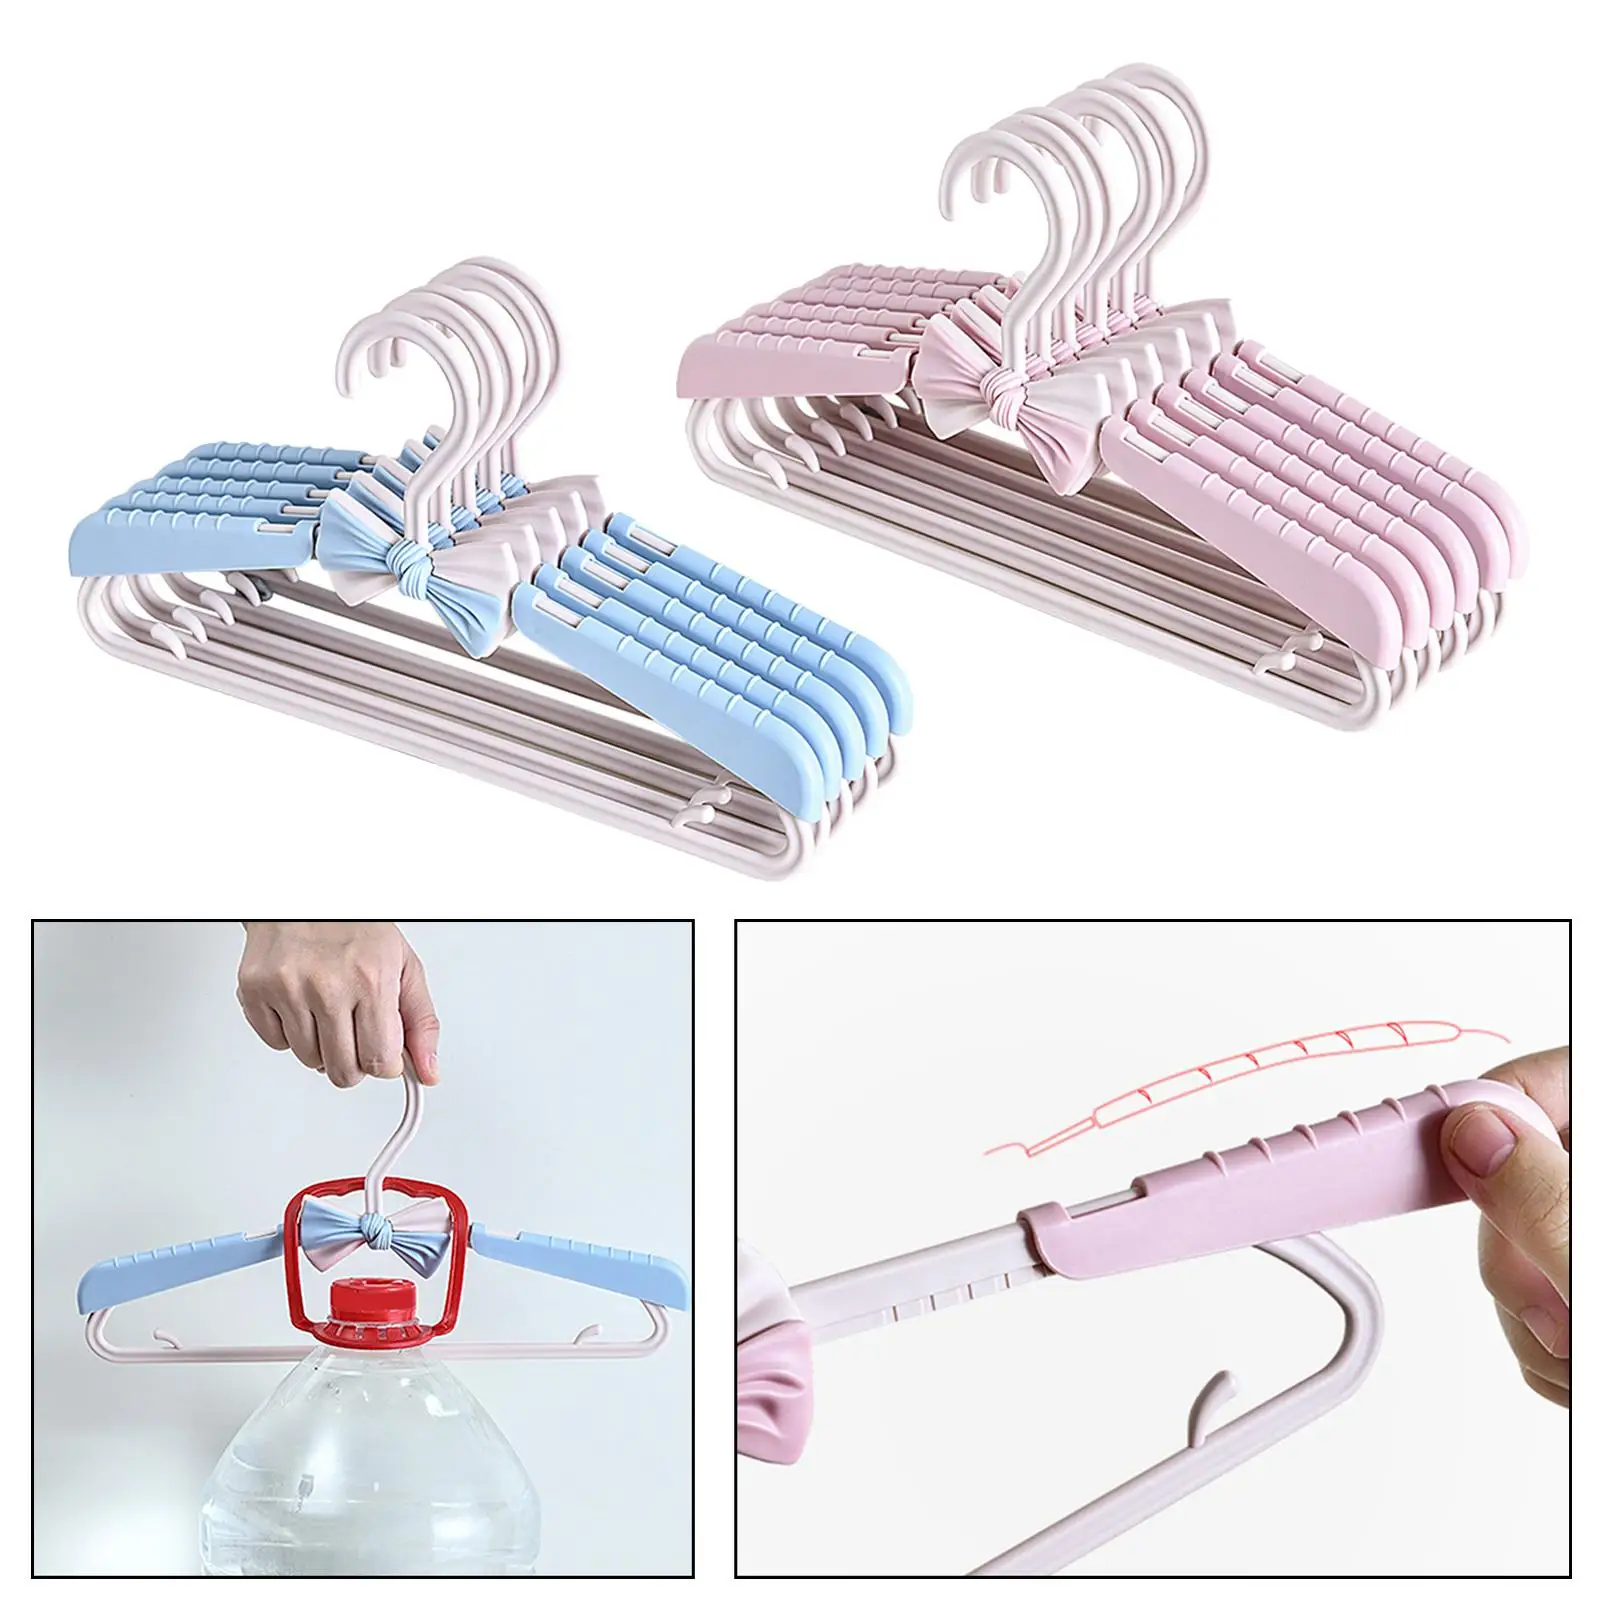 Non Slip Telescopic Closet Hanger Extendable Clothes Hangers Clothes Drying Rack Adjustable Kid Hanger for Trousers Jeans Scarf